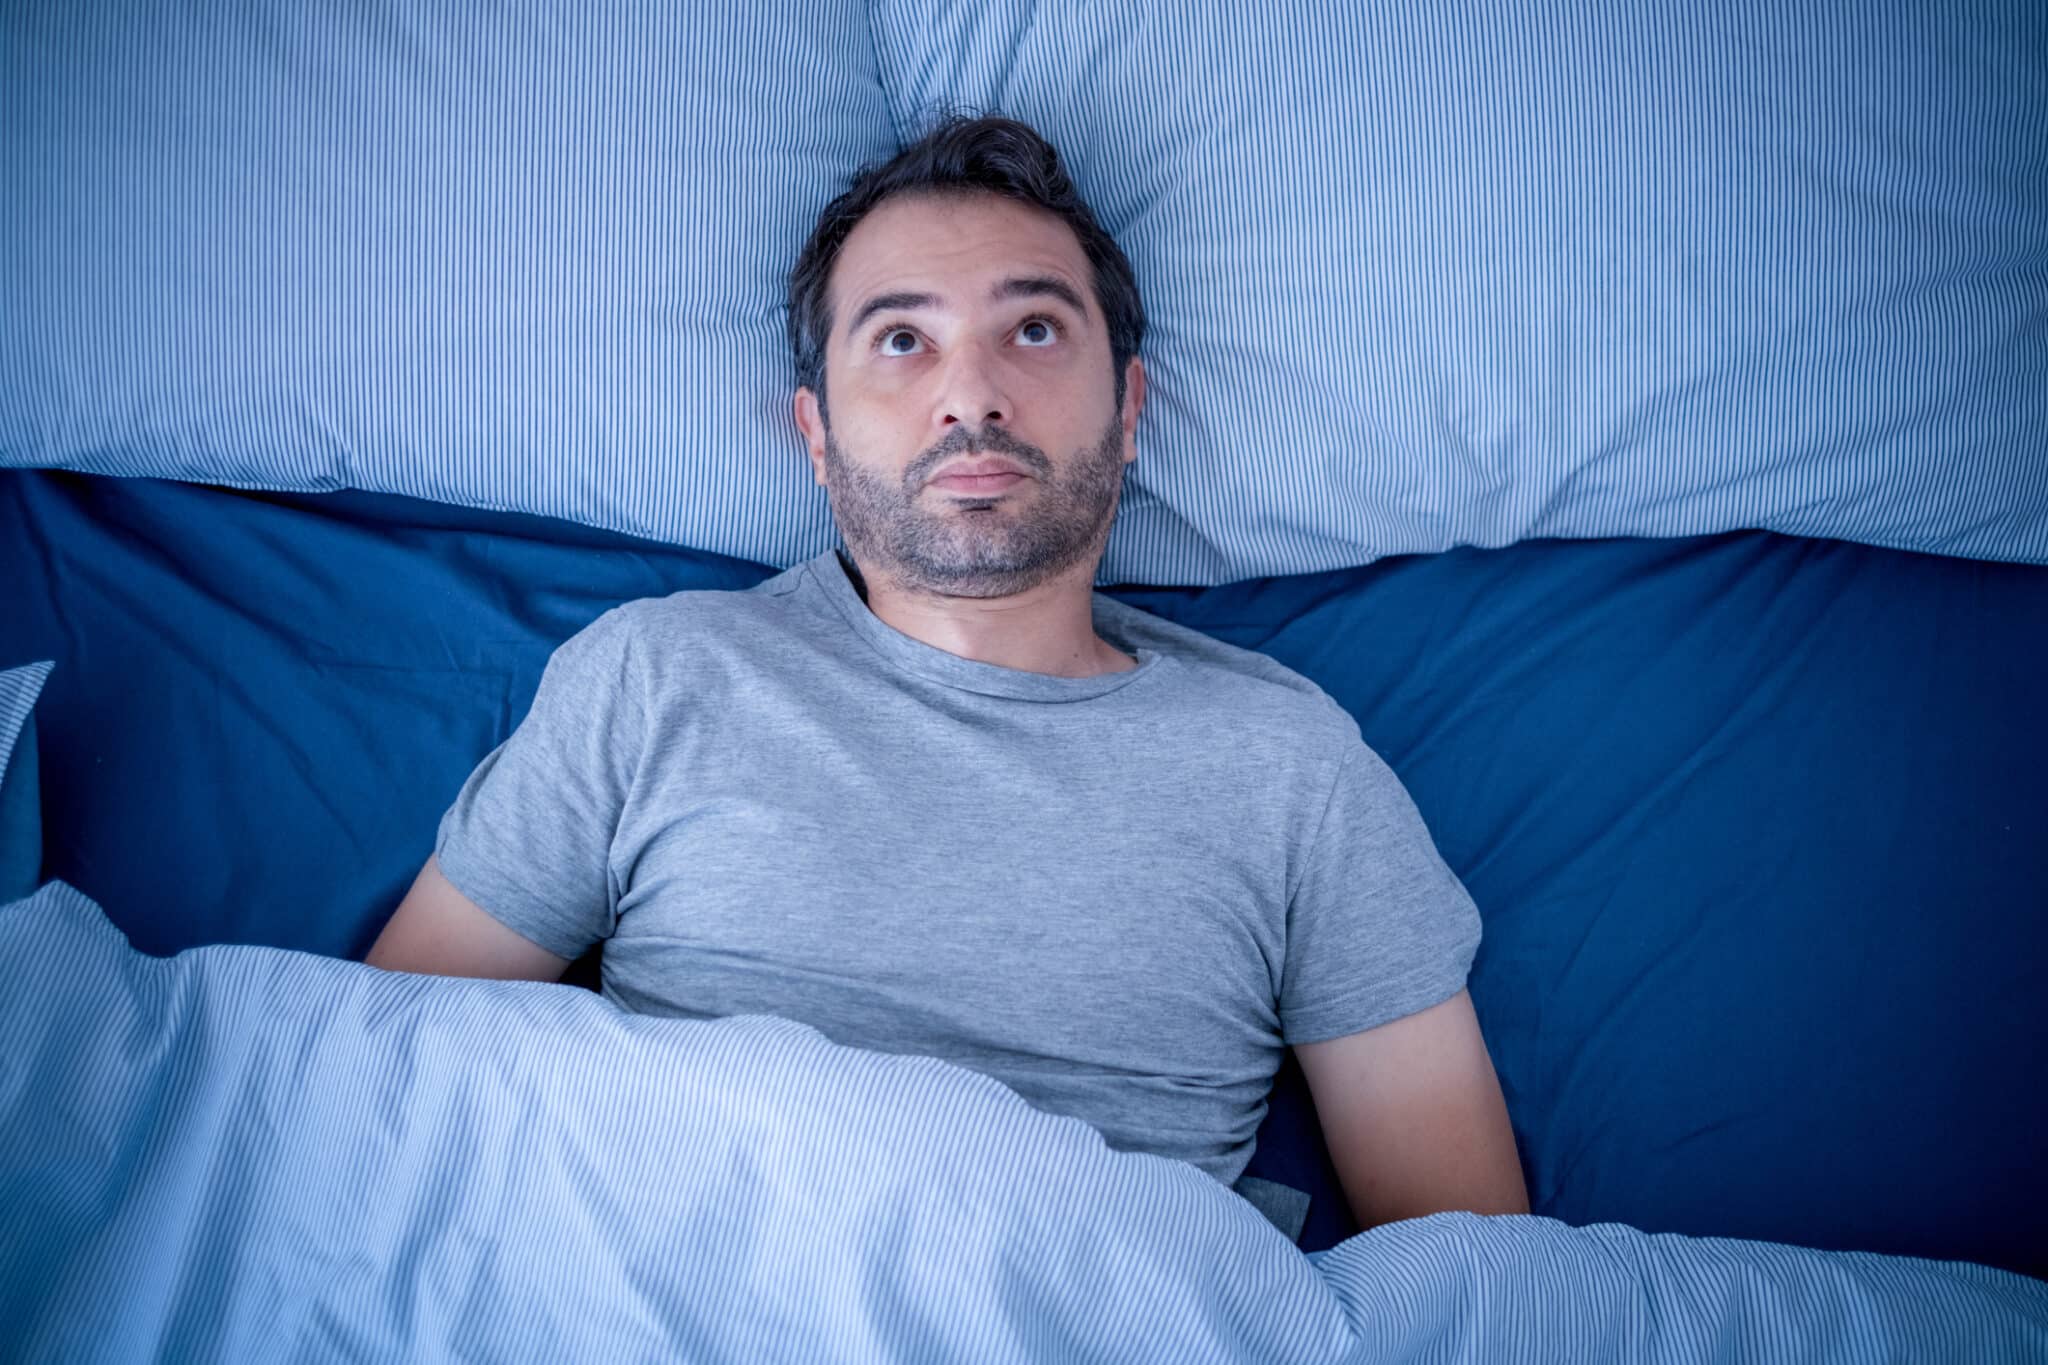 what triggers insomnia?